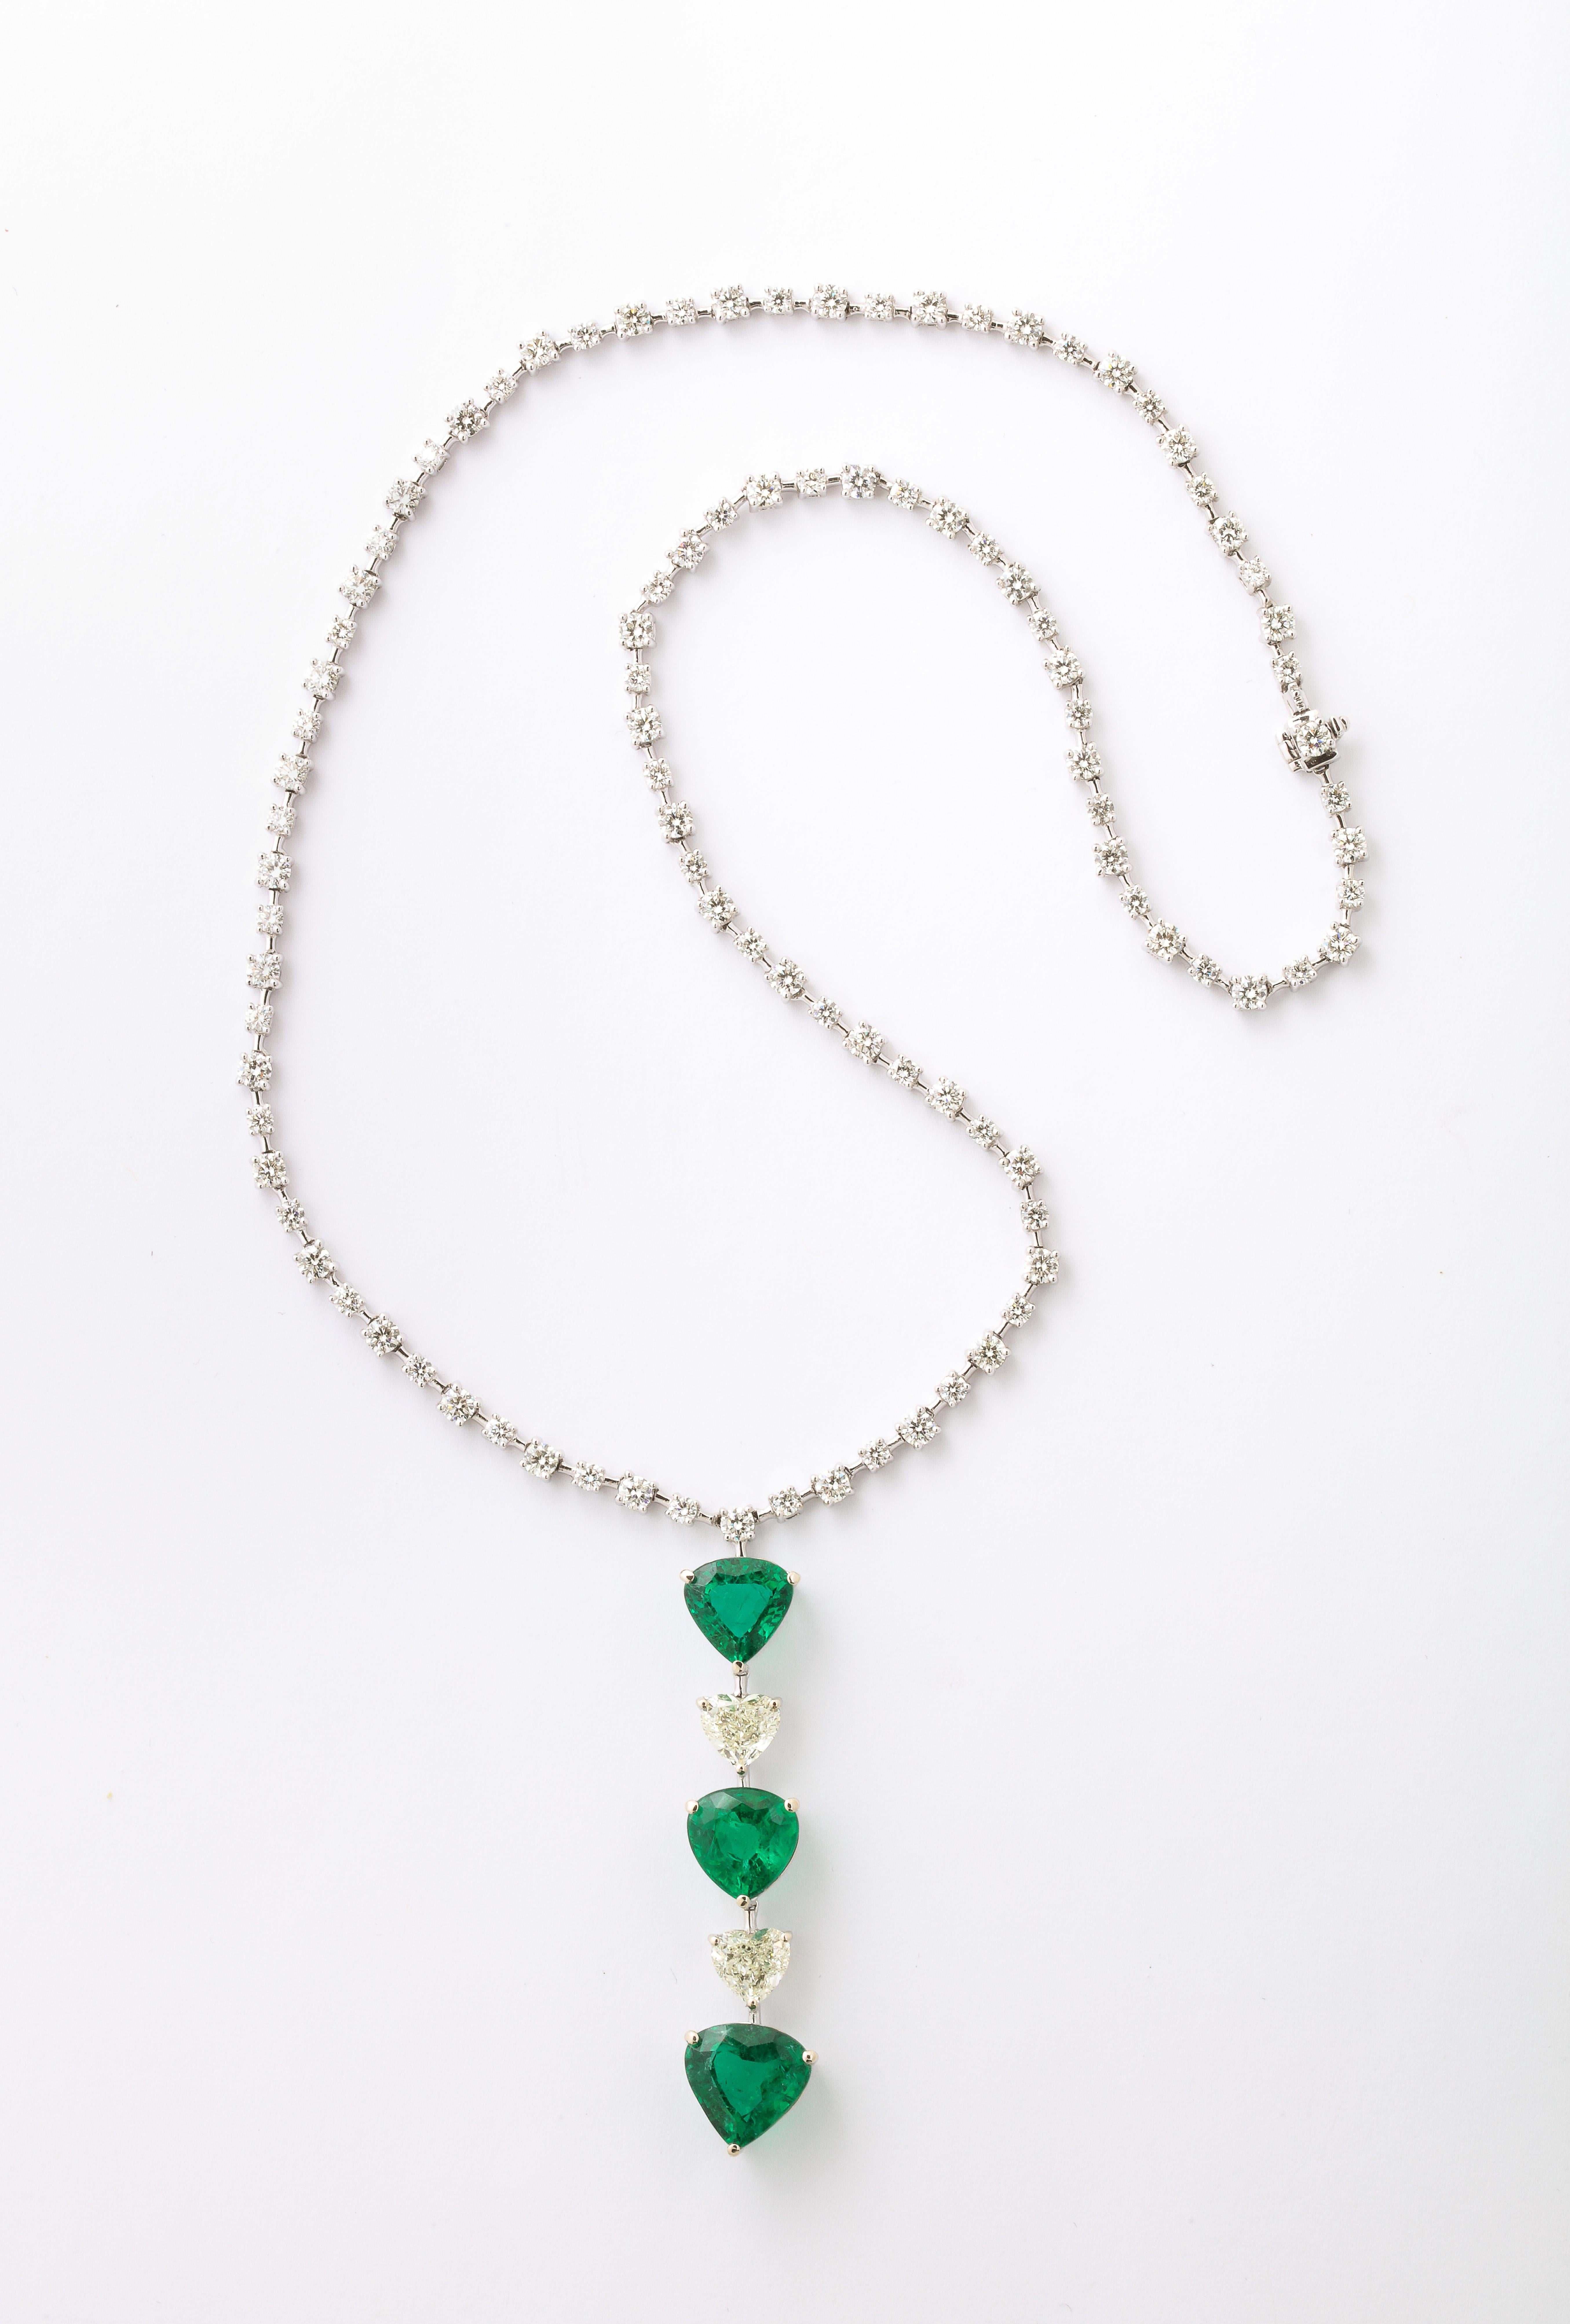 Heart Shape Emerald and Diamond Necklace For Sale 3